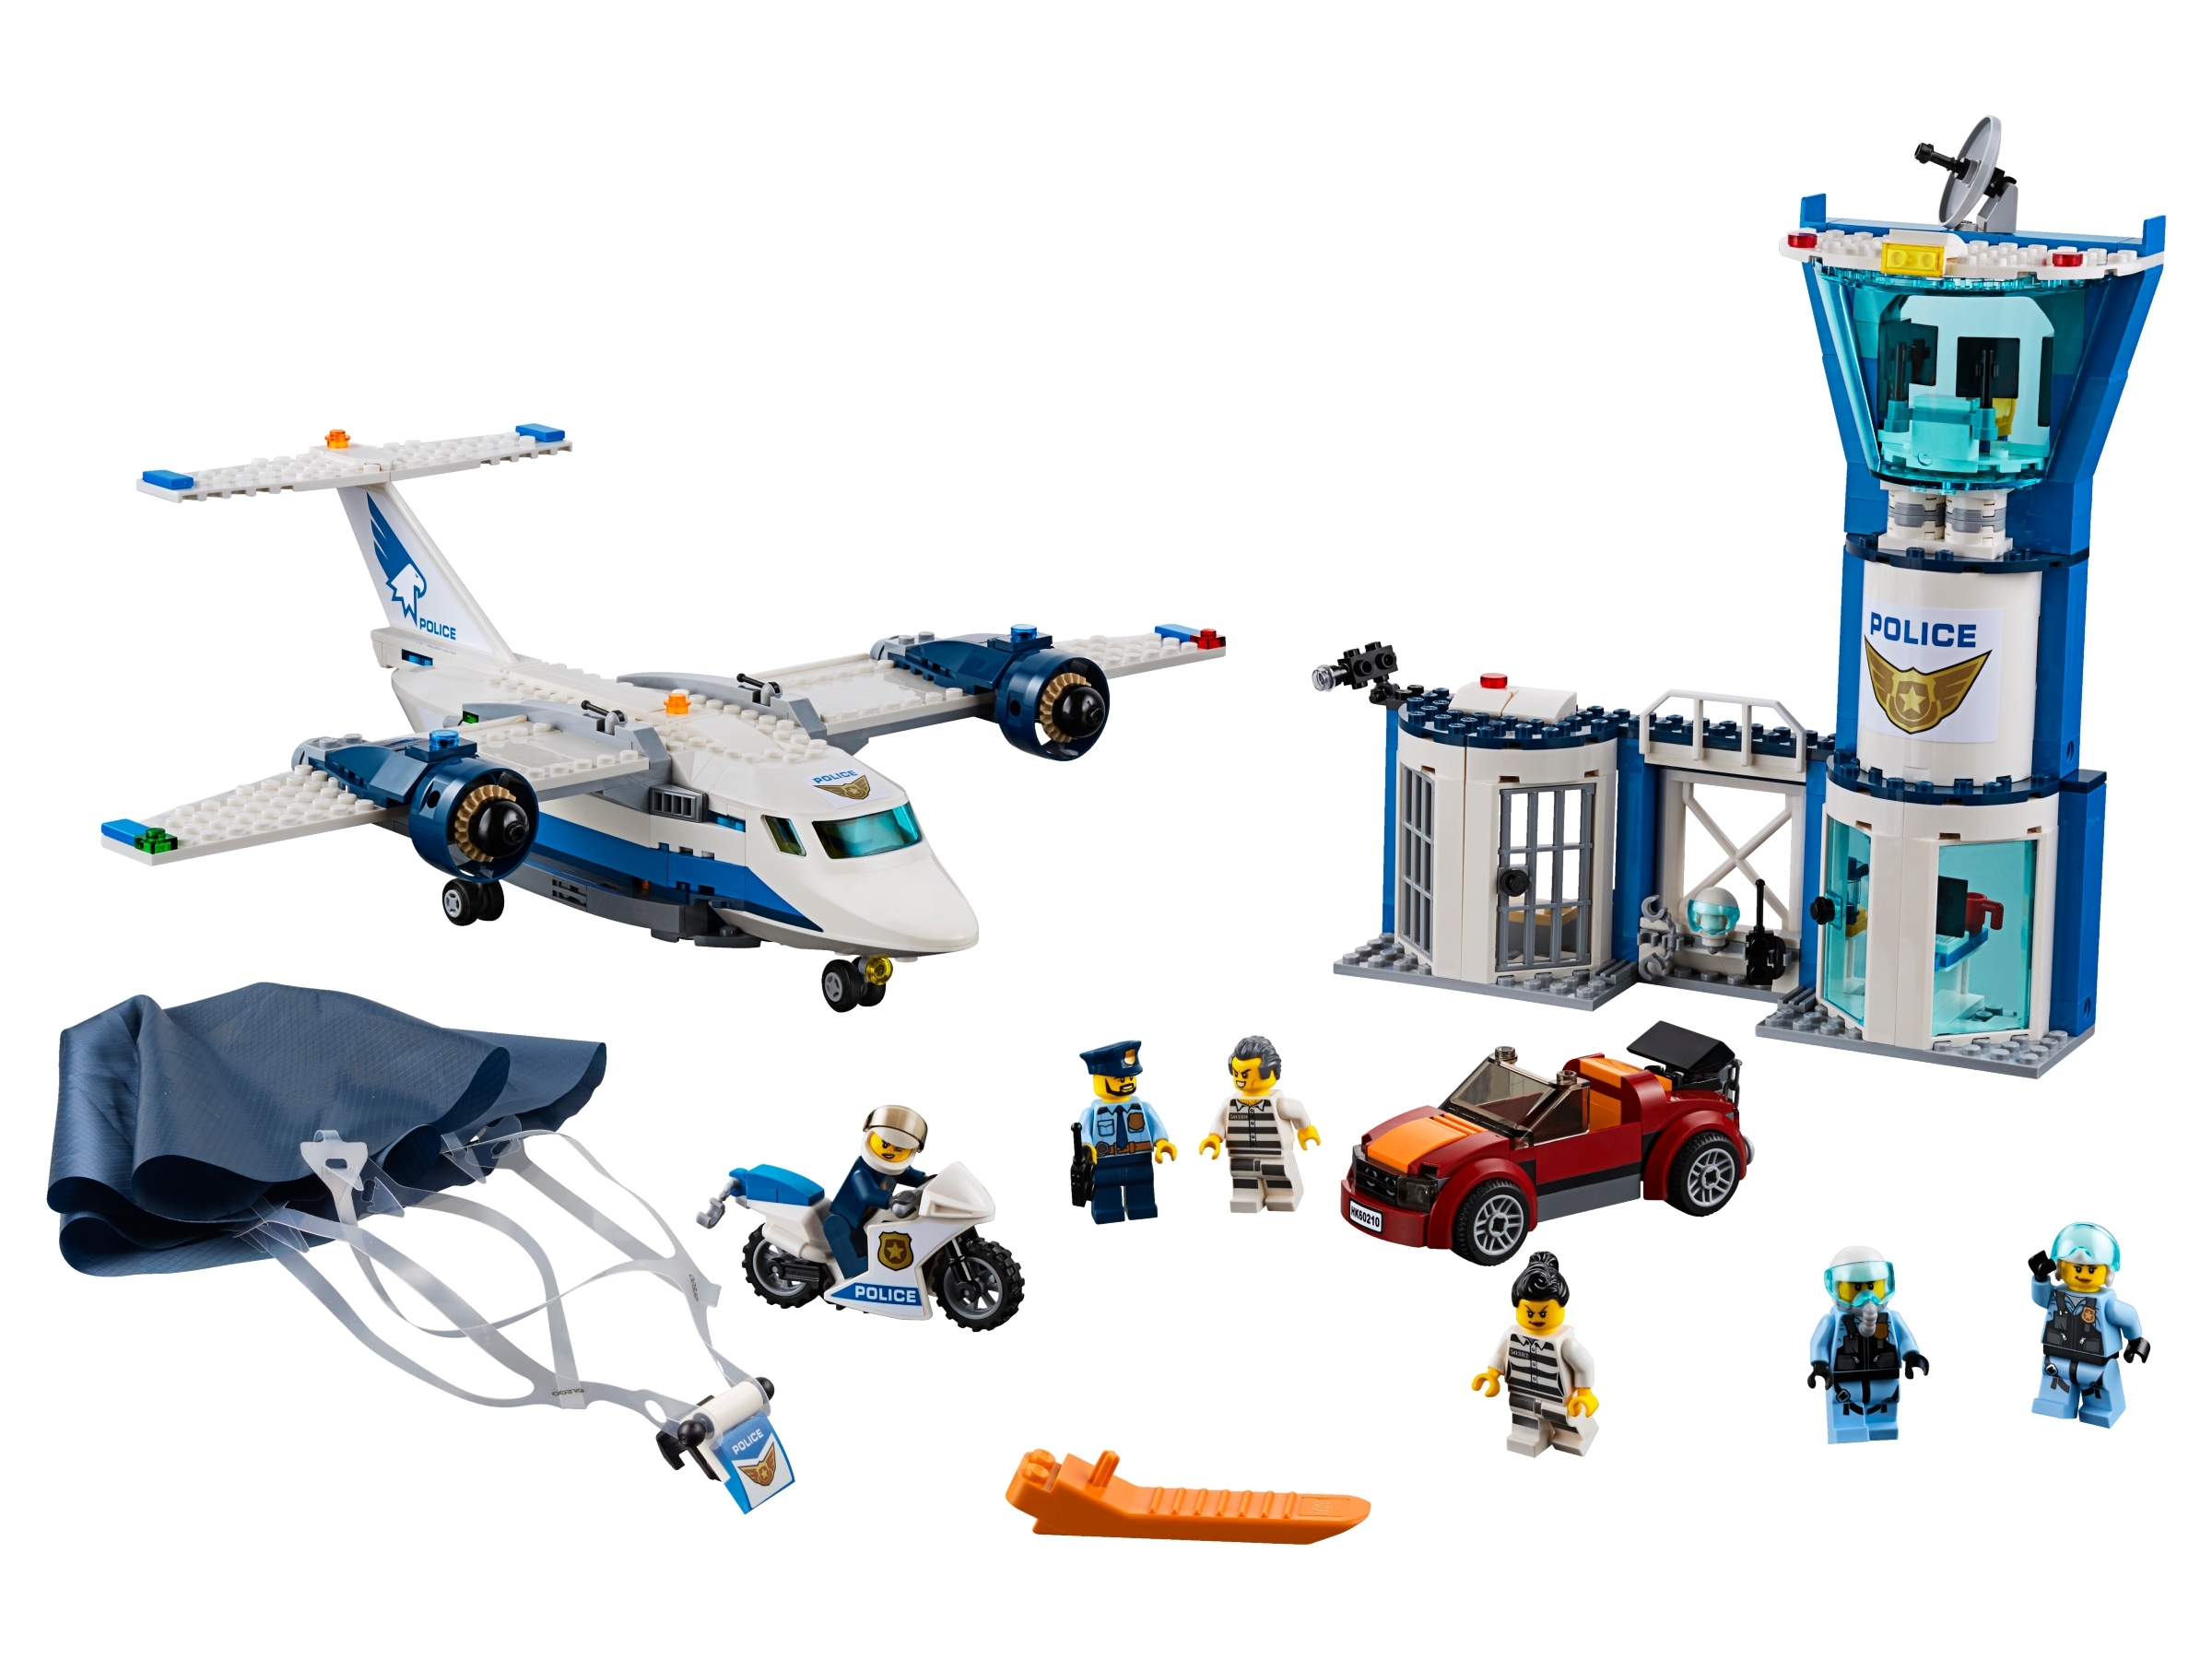 Sky Police Air Base 60210 | City | Buy online at the Official LEGO